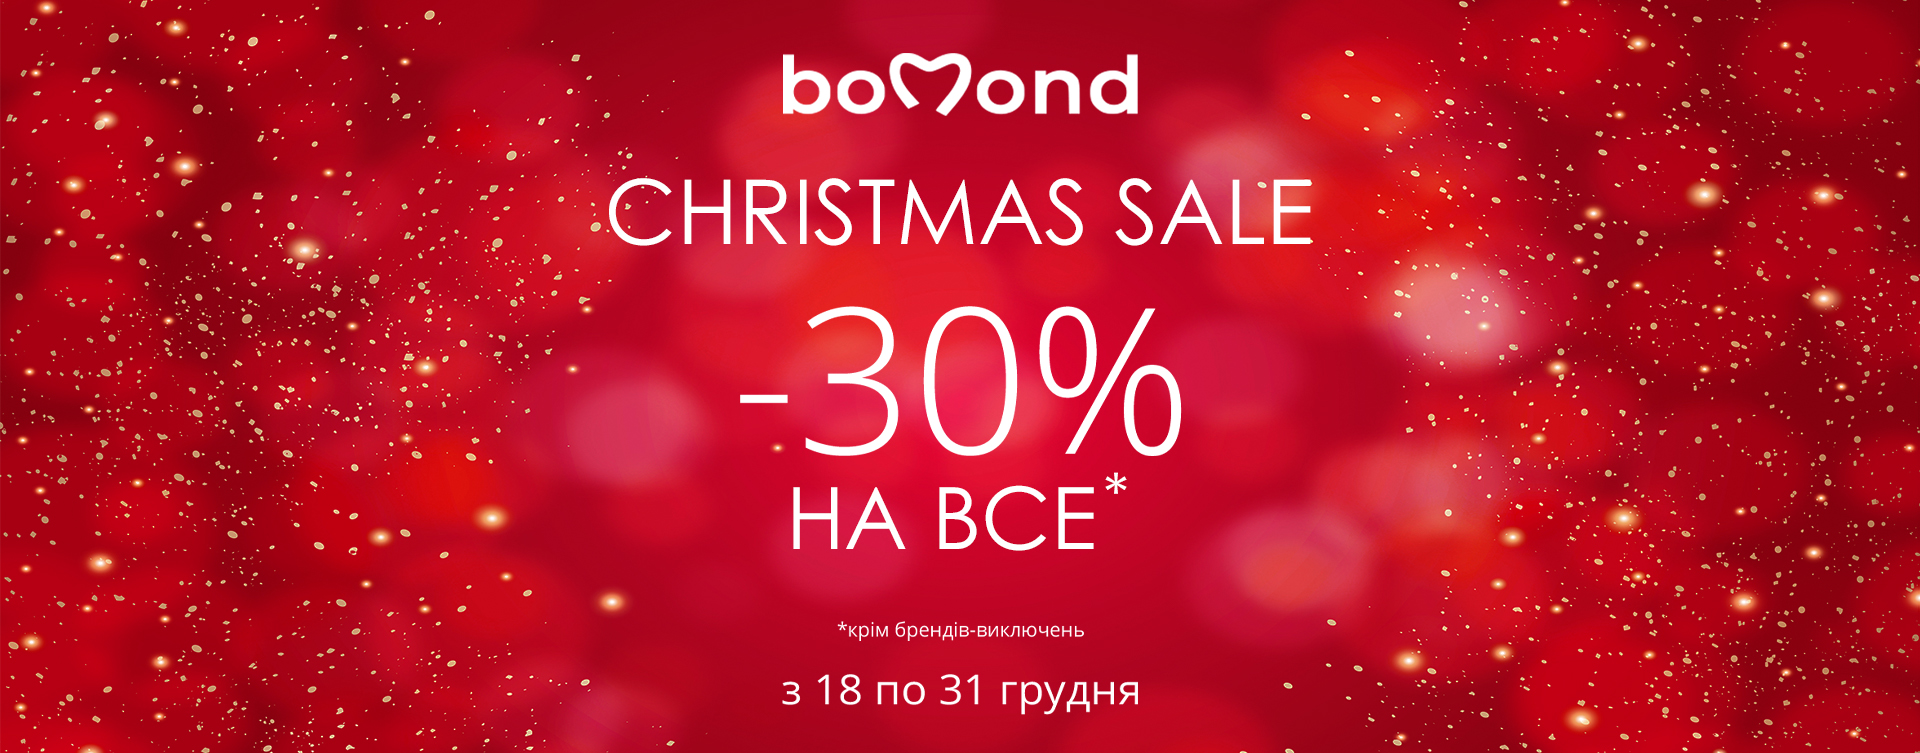 Christmas Sale -30% on everything at bomond